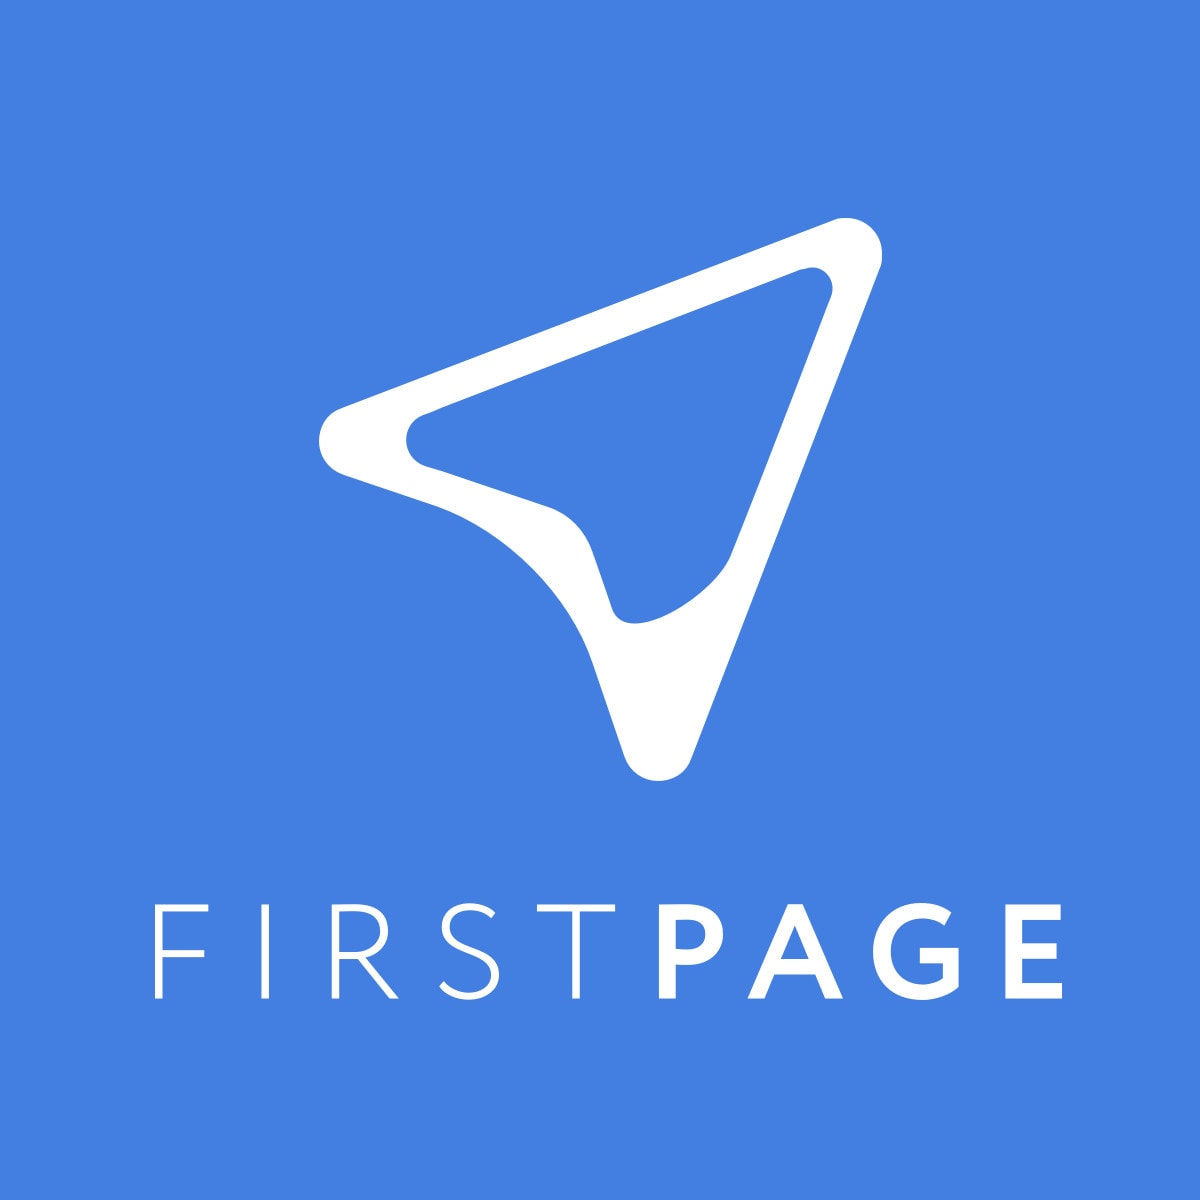 Best Digital Marketing Agency in Singapore - First Page Digital